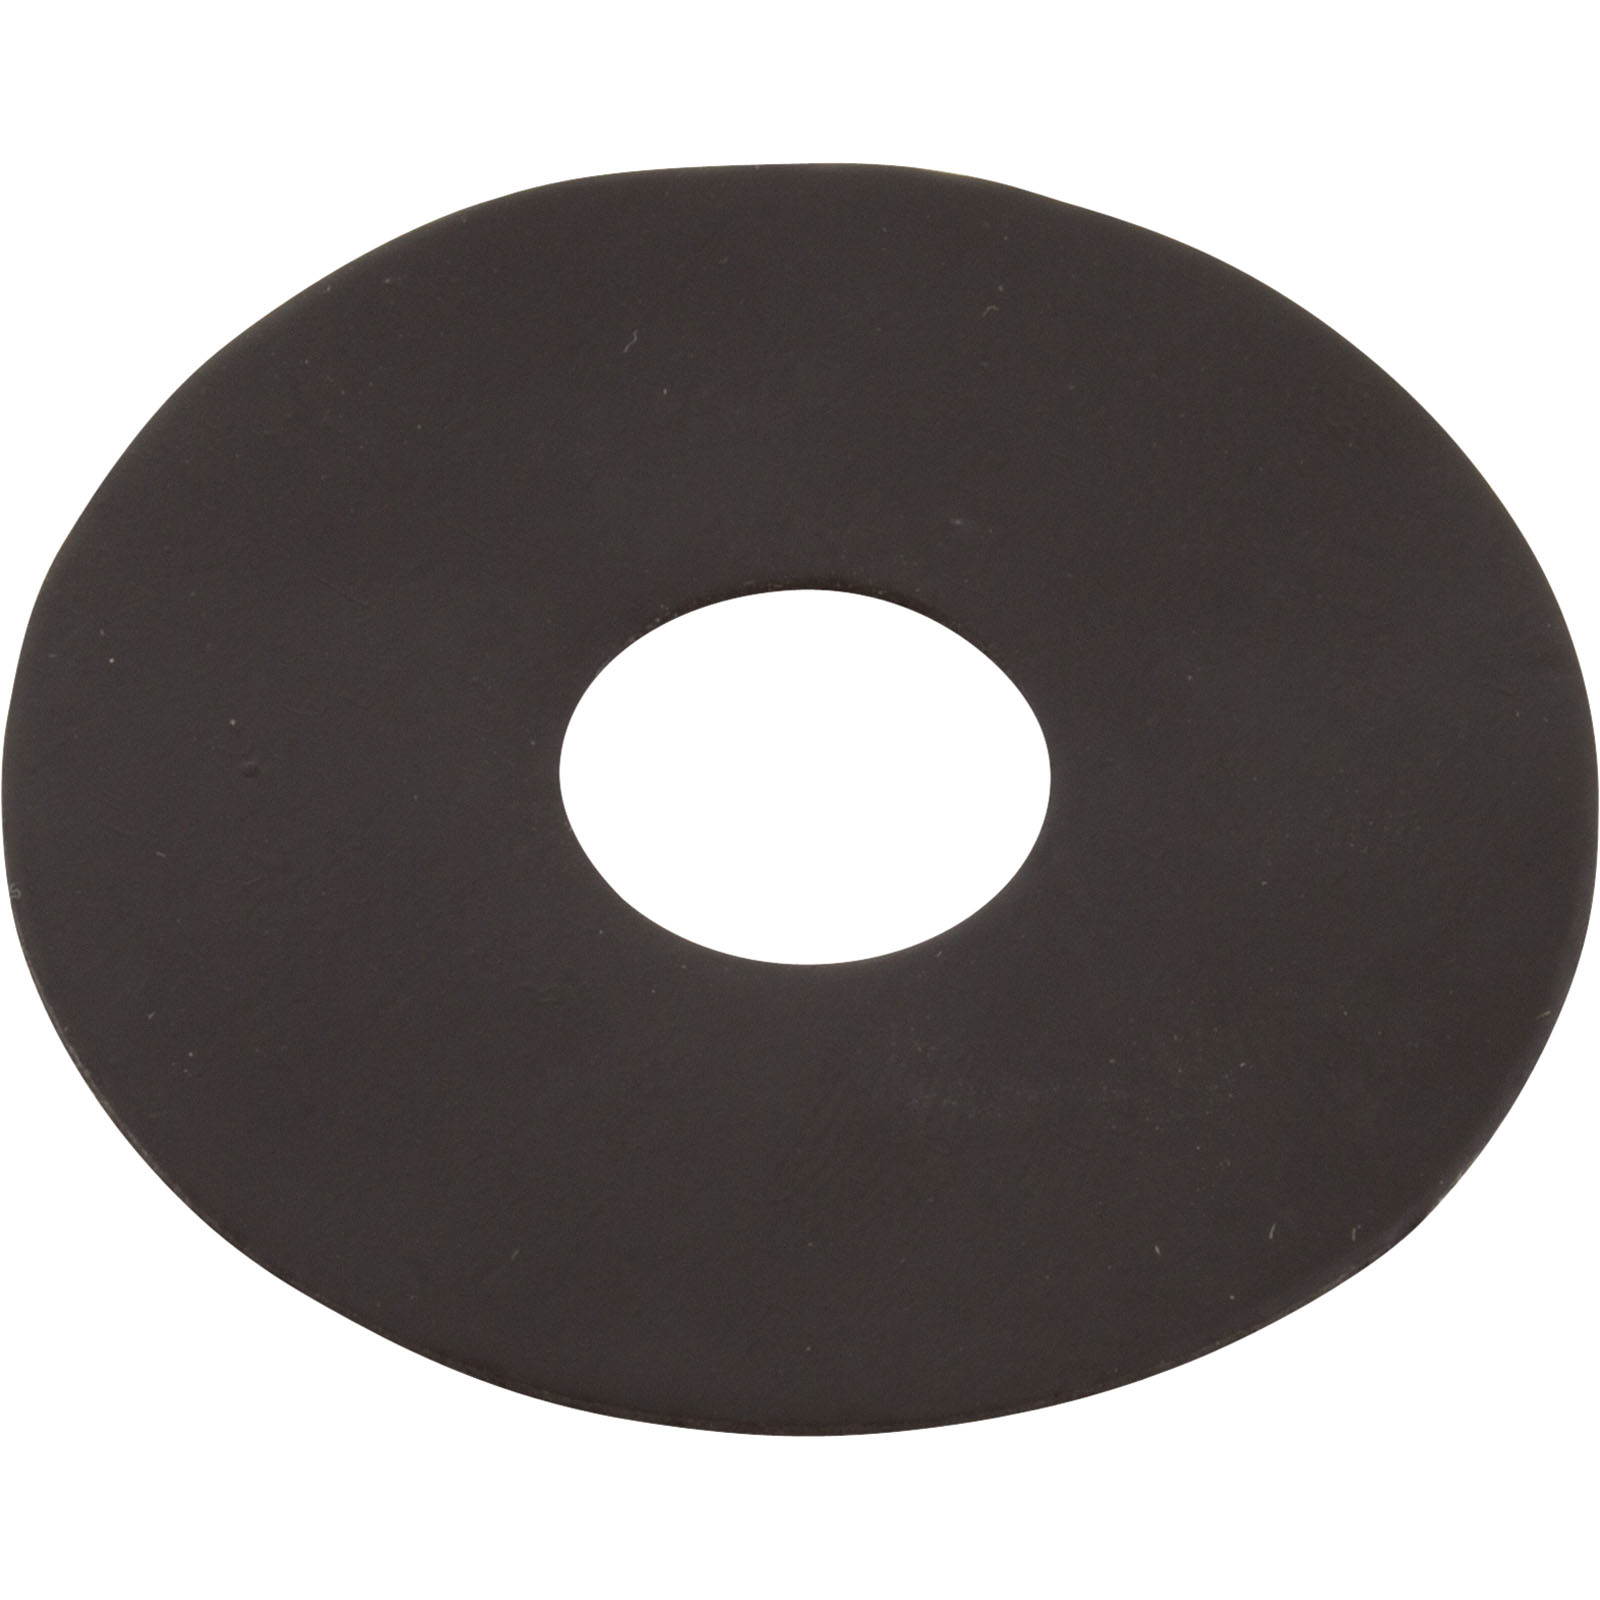 Picture of Washer, SR Smith, 1/2" x 2", Rubber, Diving Board Mount